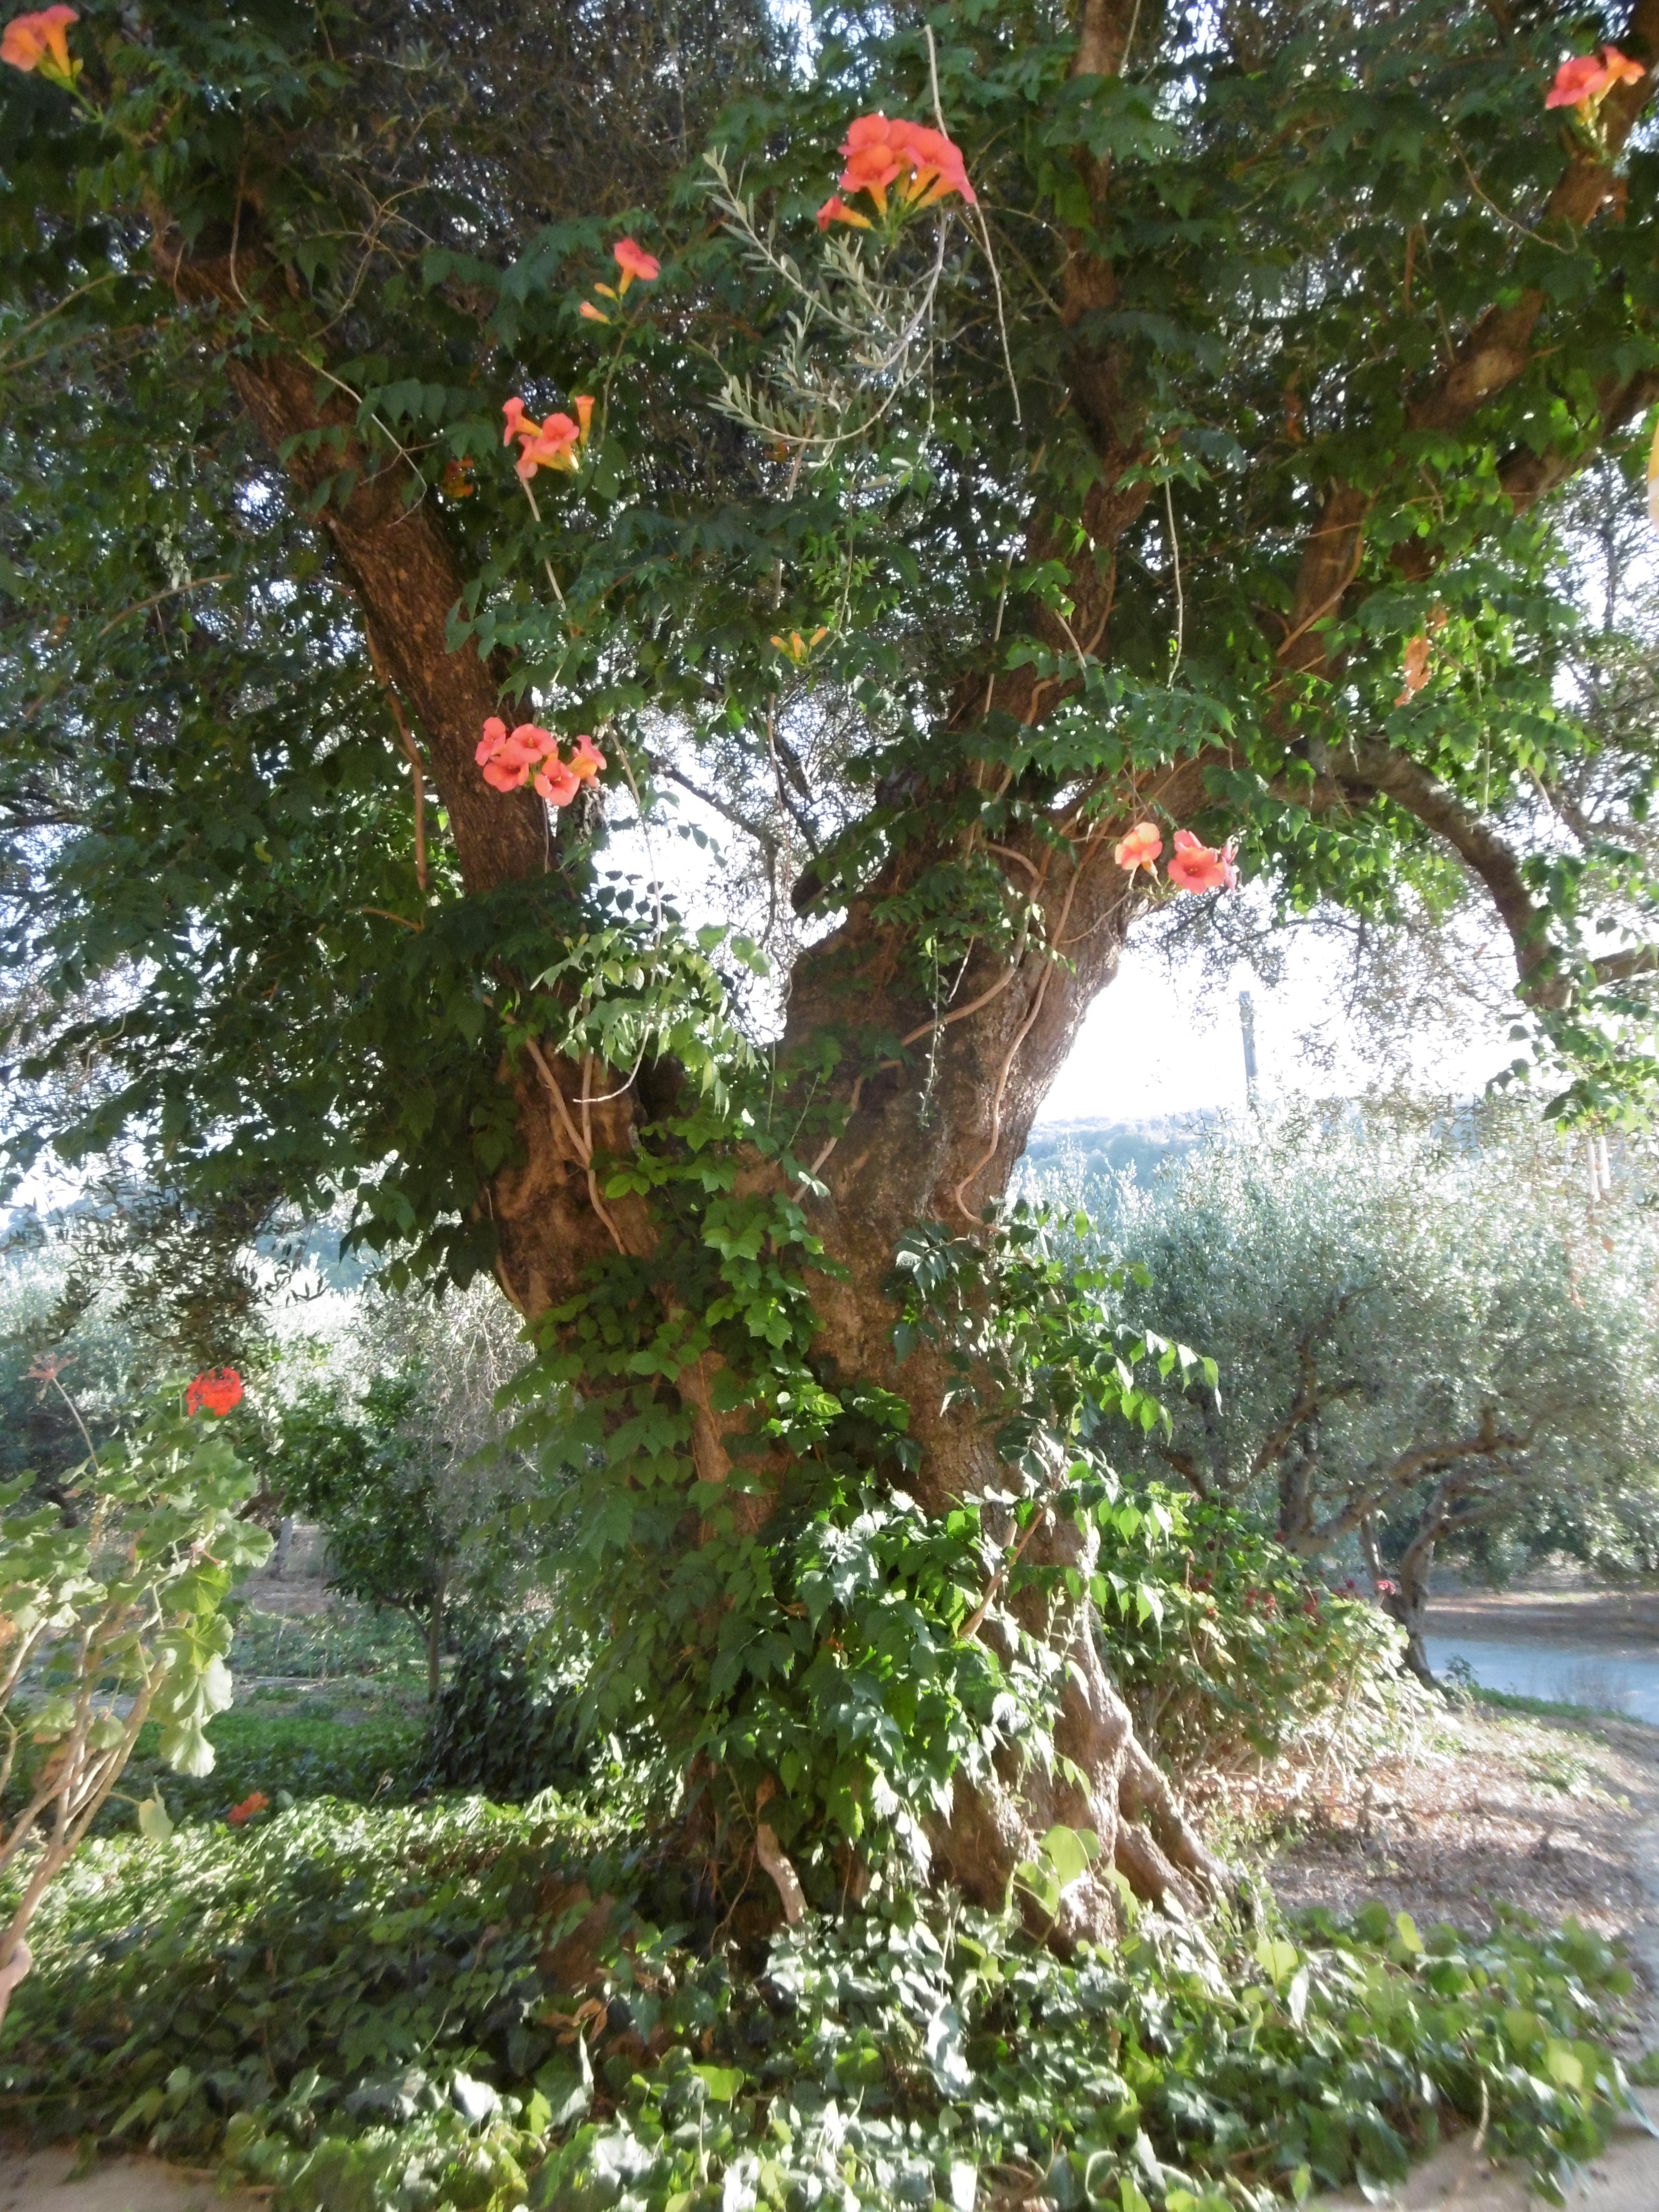 800-year old olive tree